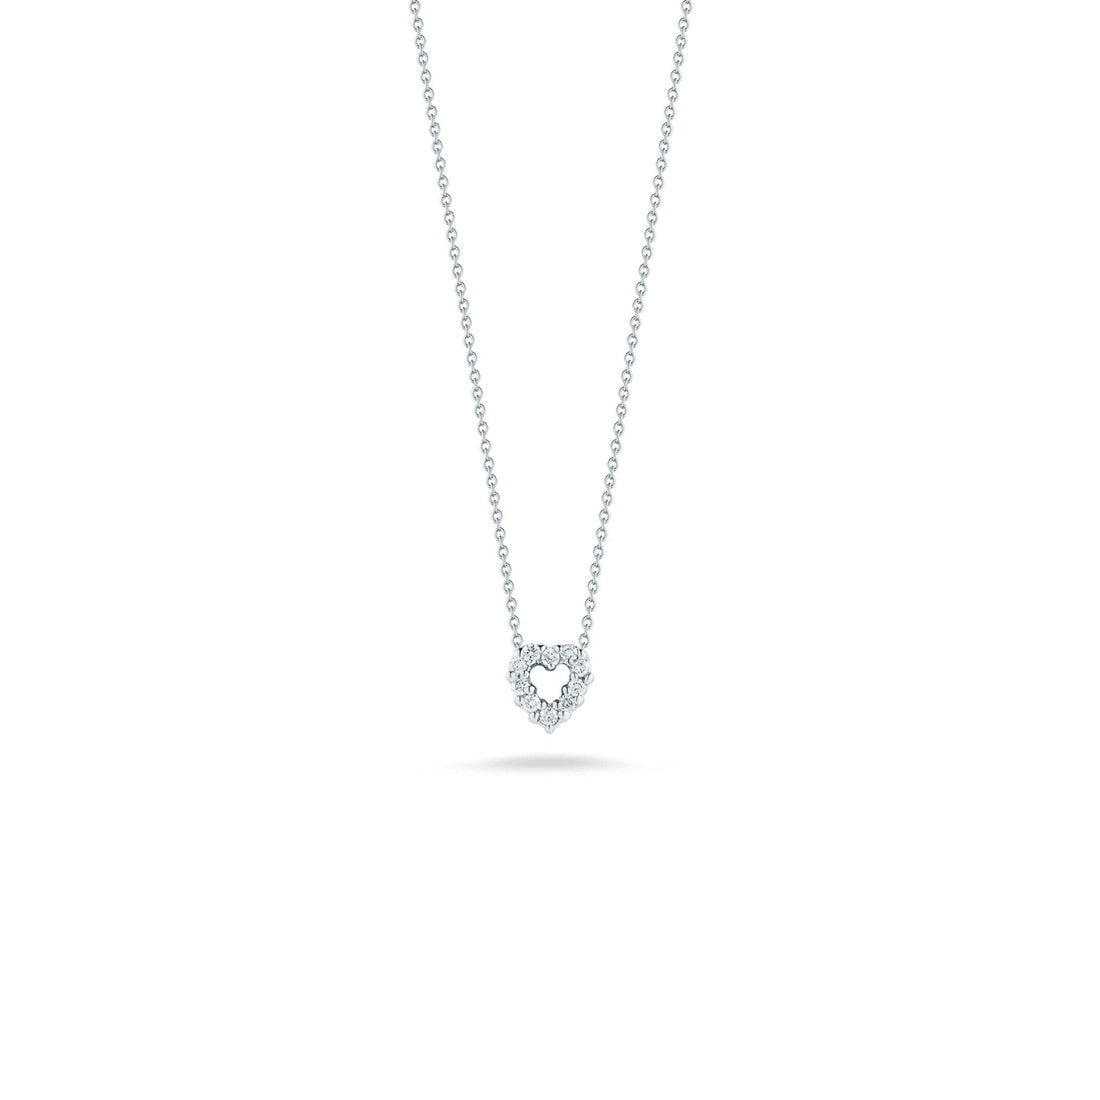 Roberto Coin Tiny Heart Necklace with Diamonds White Gold